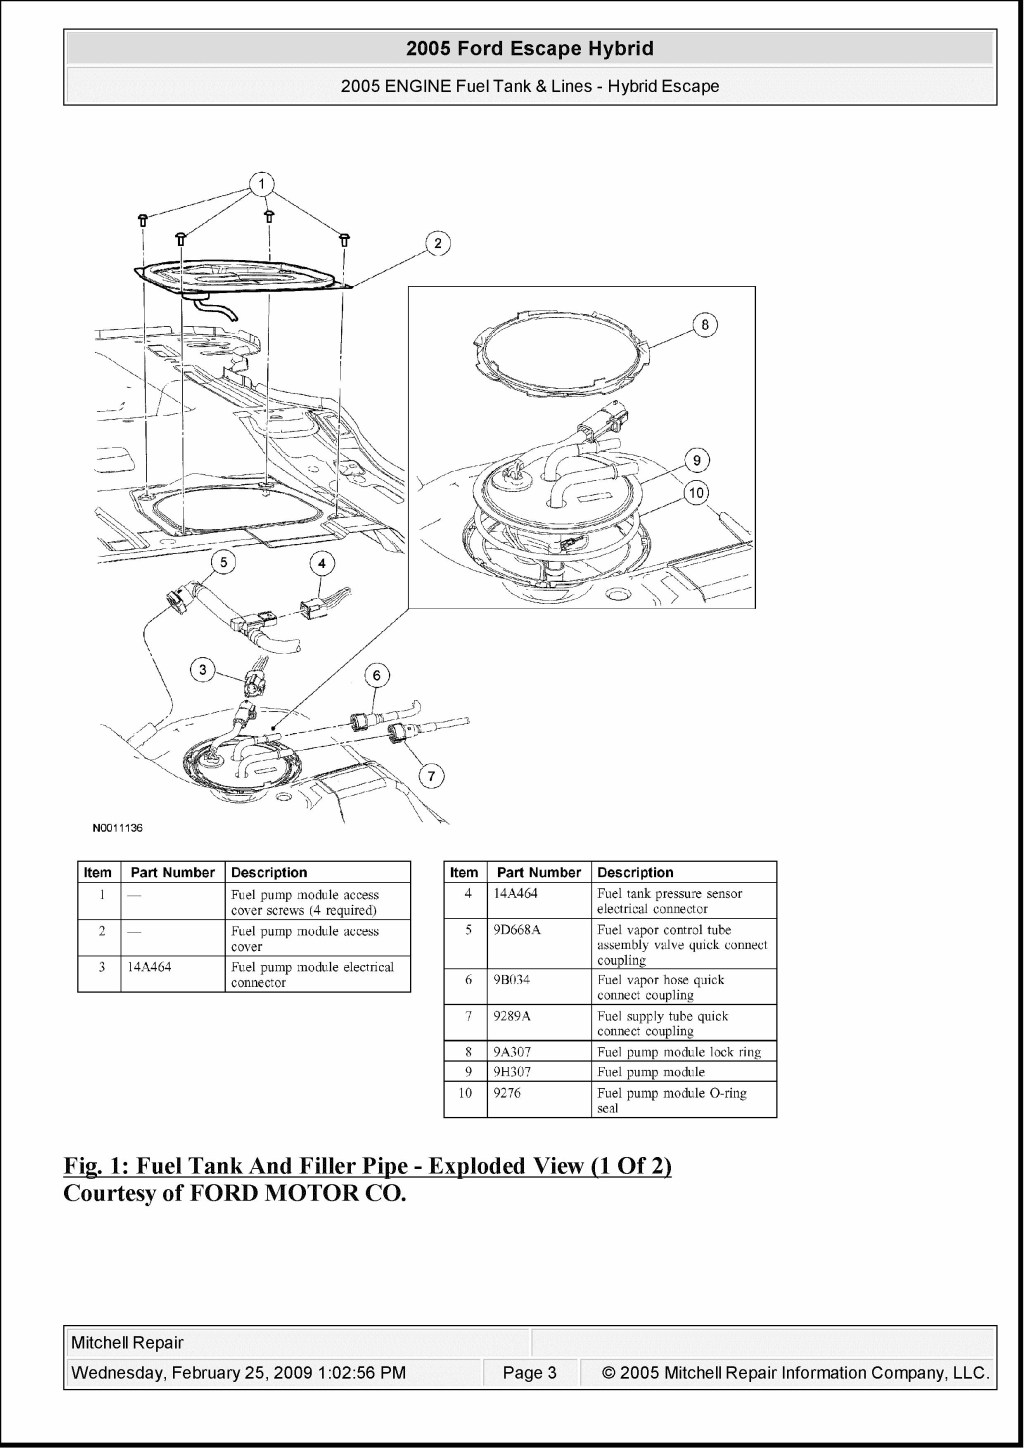 Picture of: FORD ESCAPE HYBRID Service Repair Manual by kmrdisbnvmk – Issuu